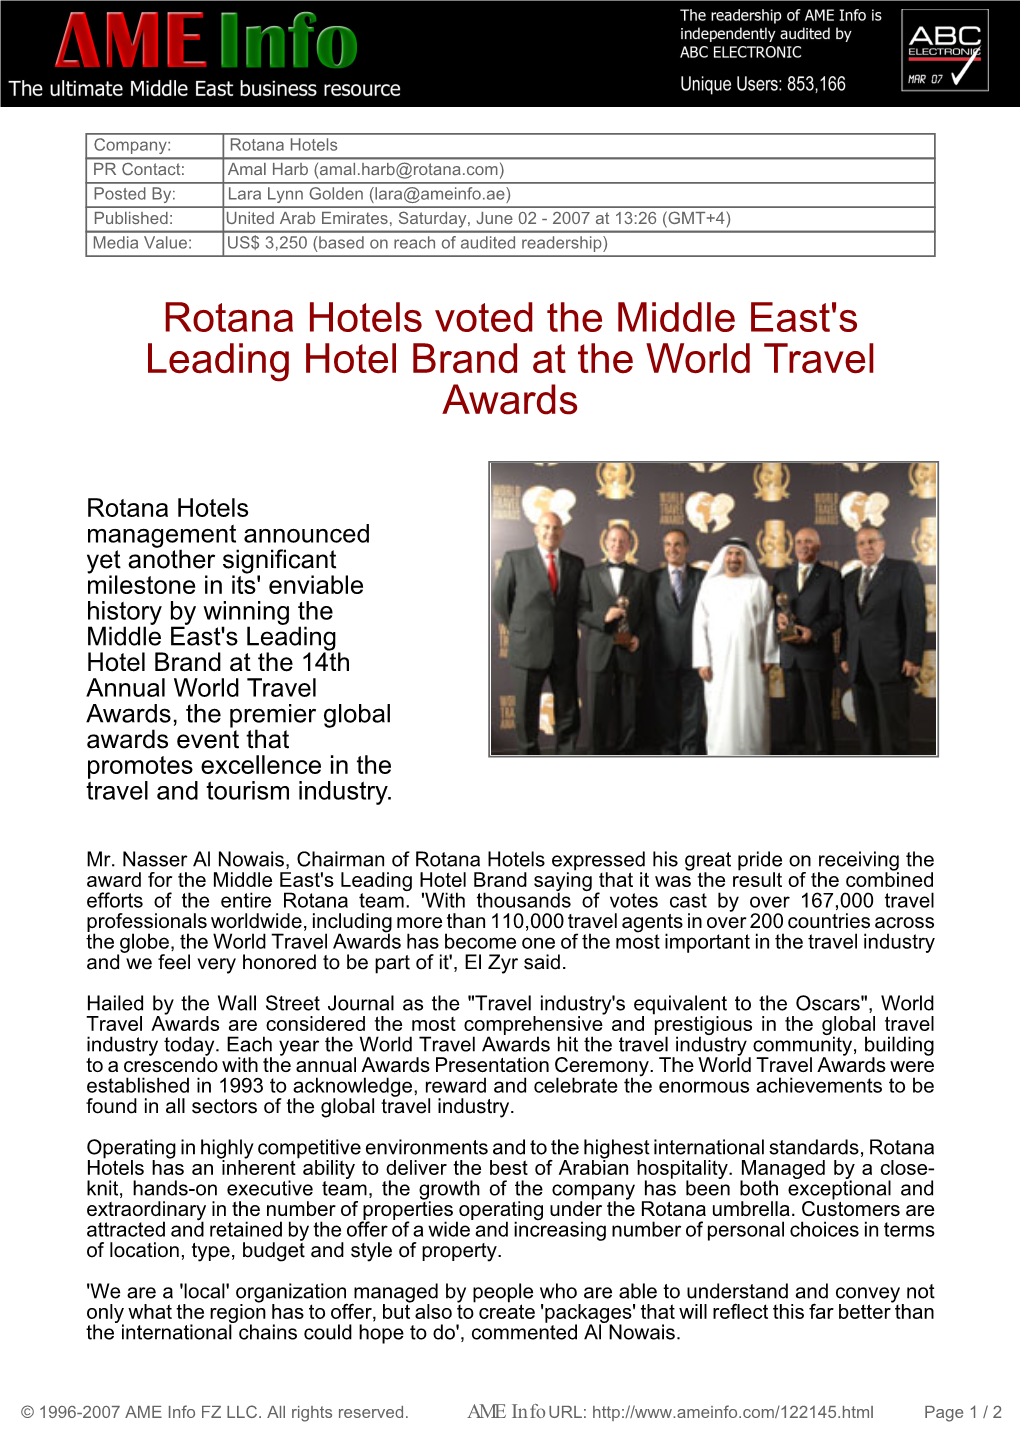 Rotana Hotels Voted the Middle East's Leading Hotel Brand at the World Travel Awards